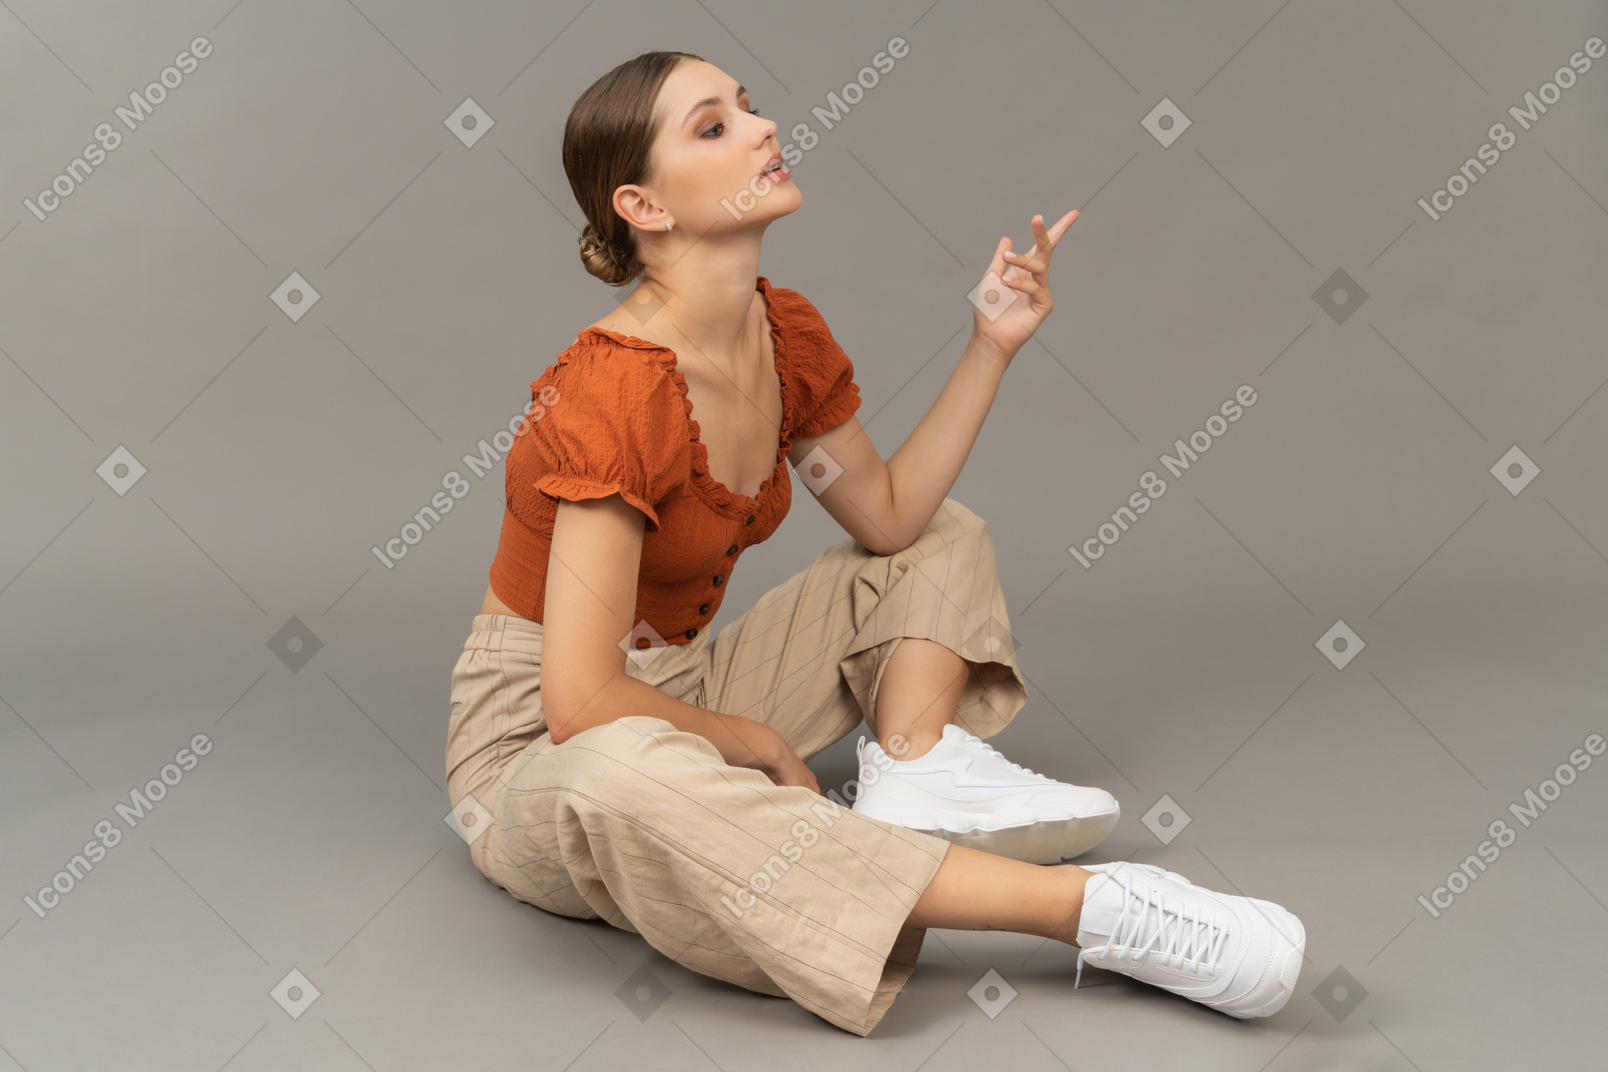 Young woman sits with raised hand